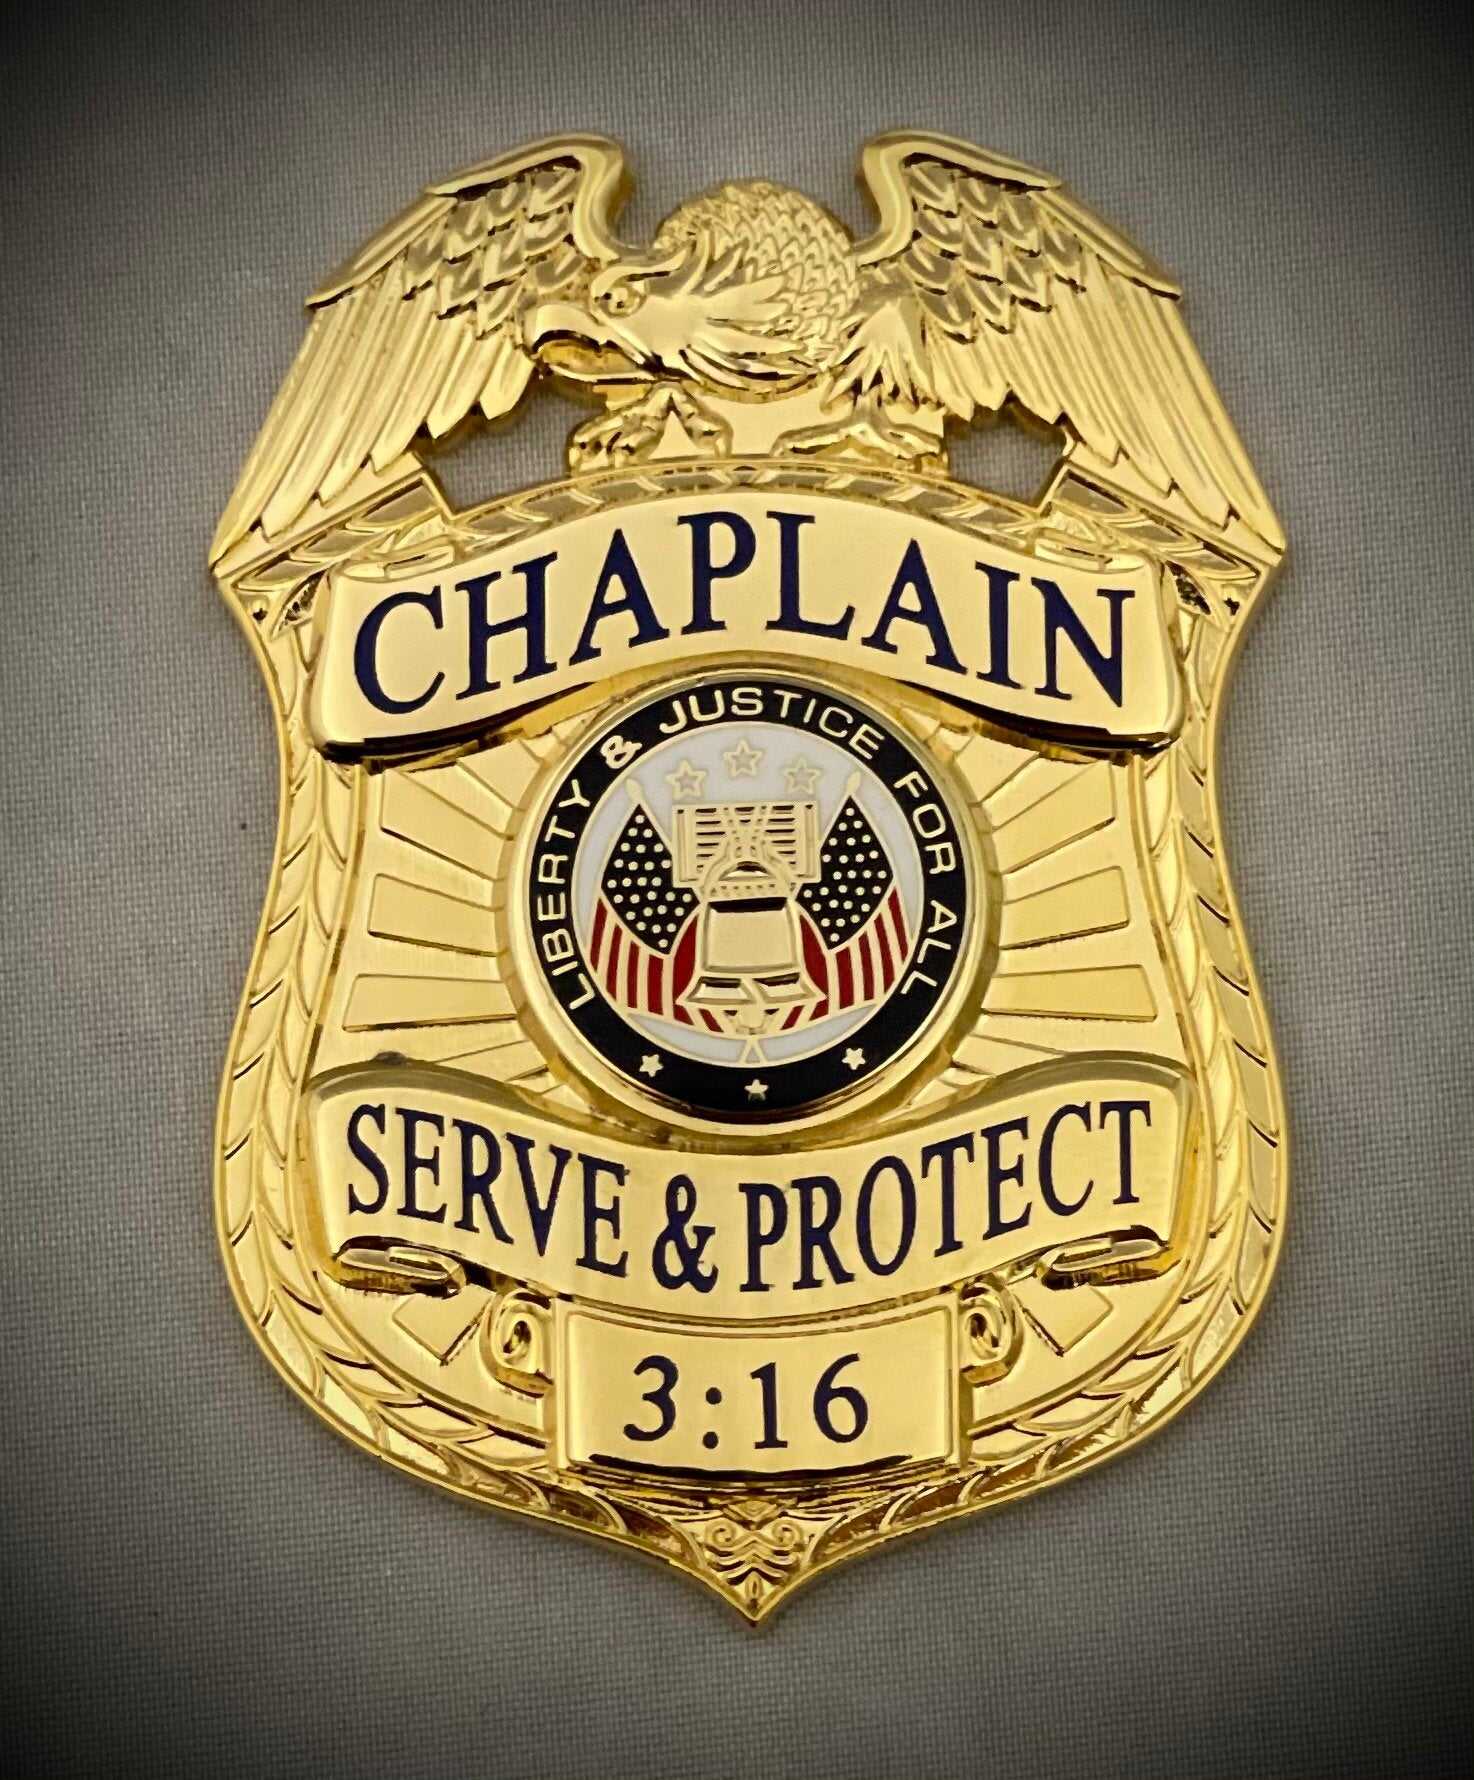 Chaplain Serve and Protect Gold Badge with Black leather belt clip holder